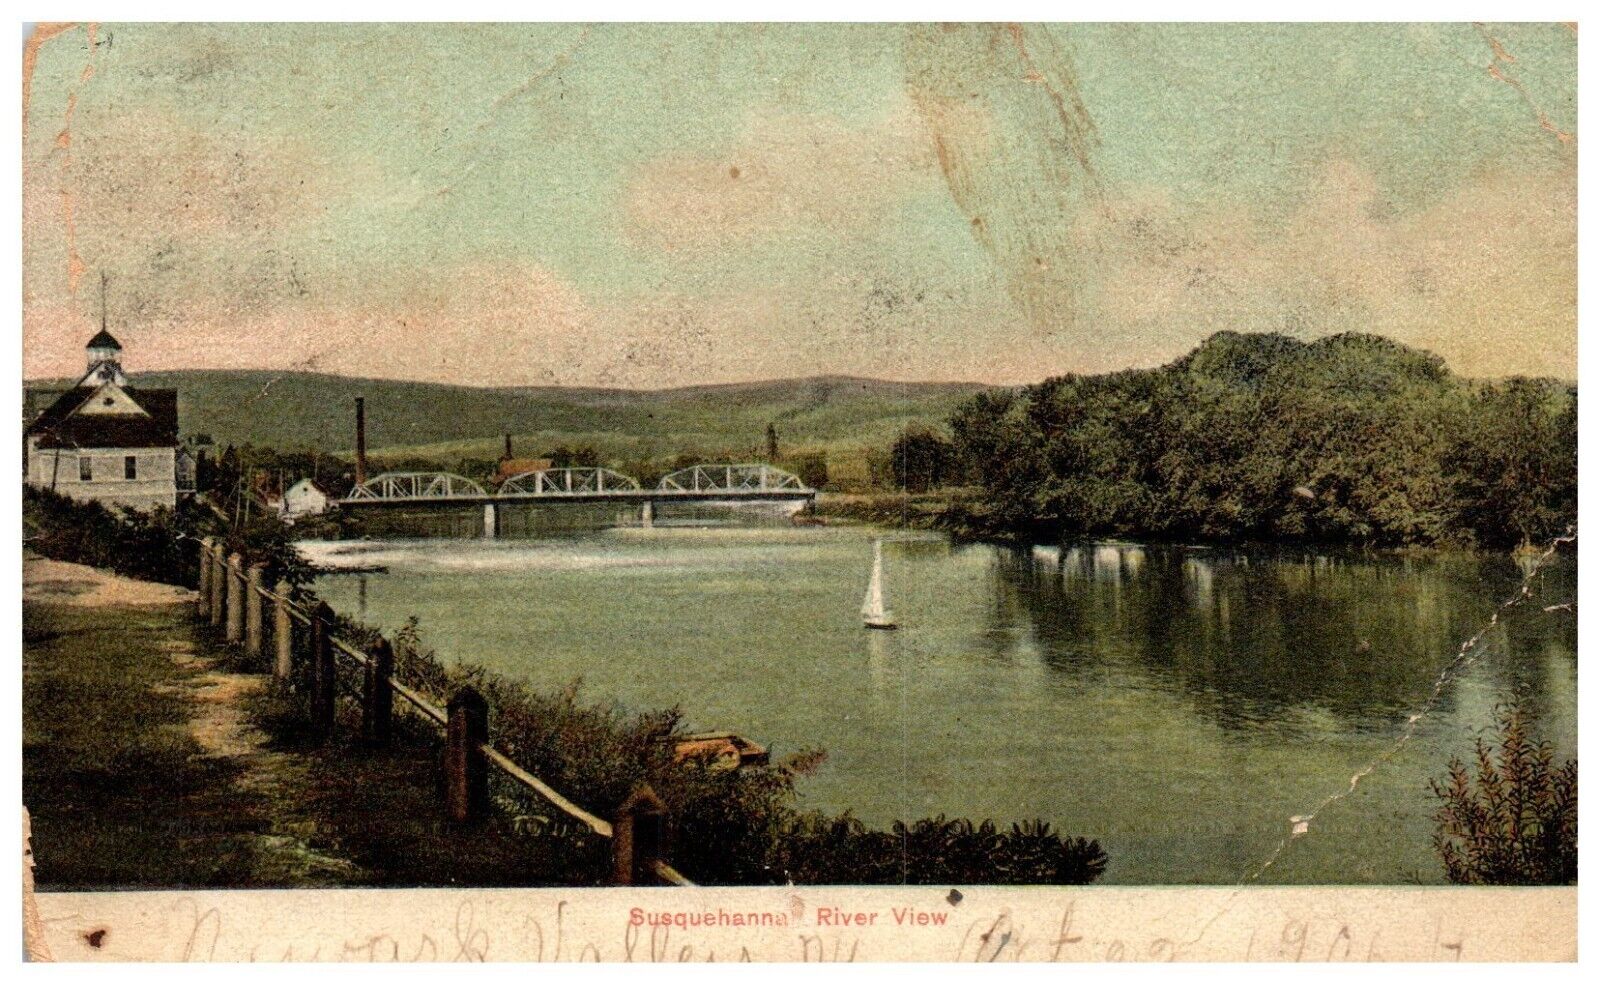 Susquehanna River View Newark Valley NY 1906 Postcard STAINED/ CREASED